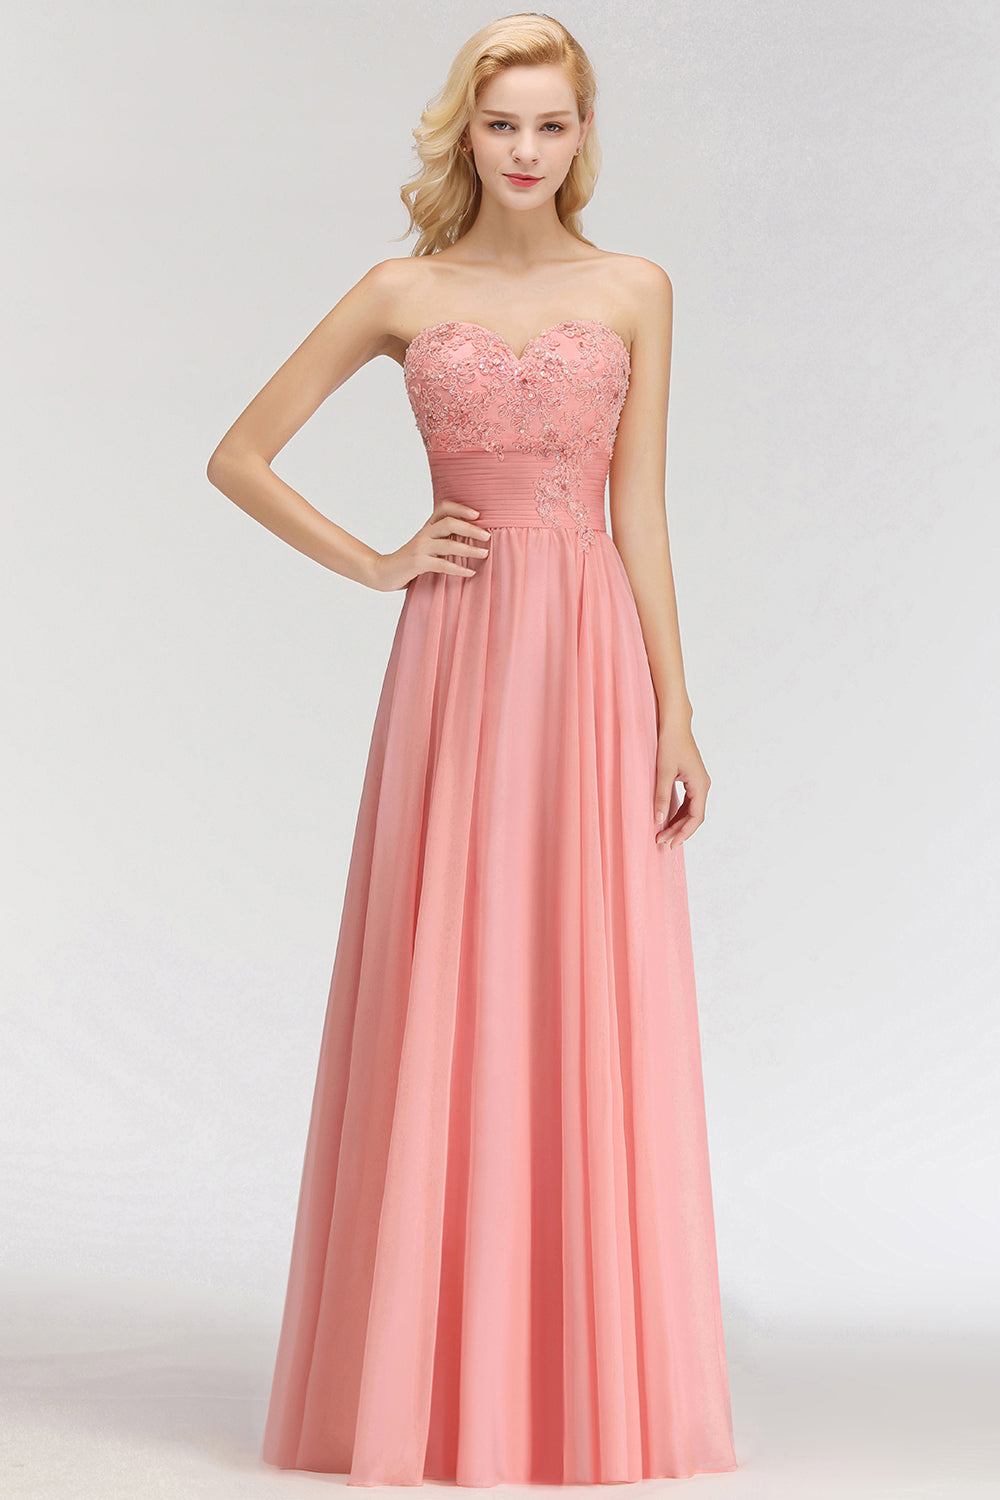 Elegant Sweetheart Ruffle Pink Bridesmaid Dresses with Appliques